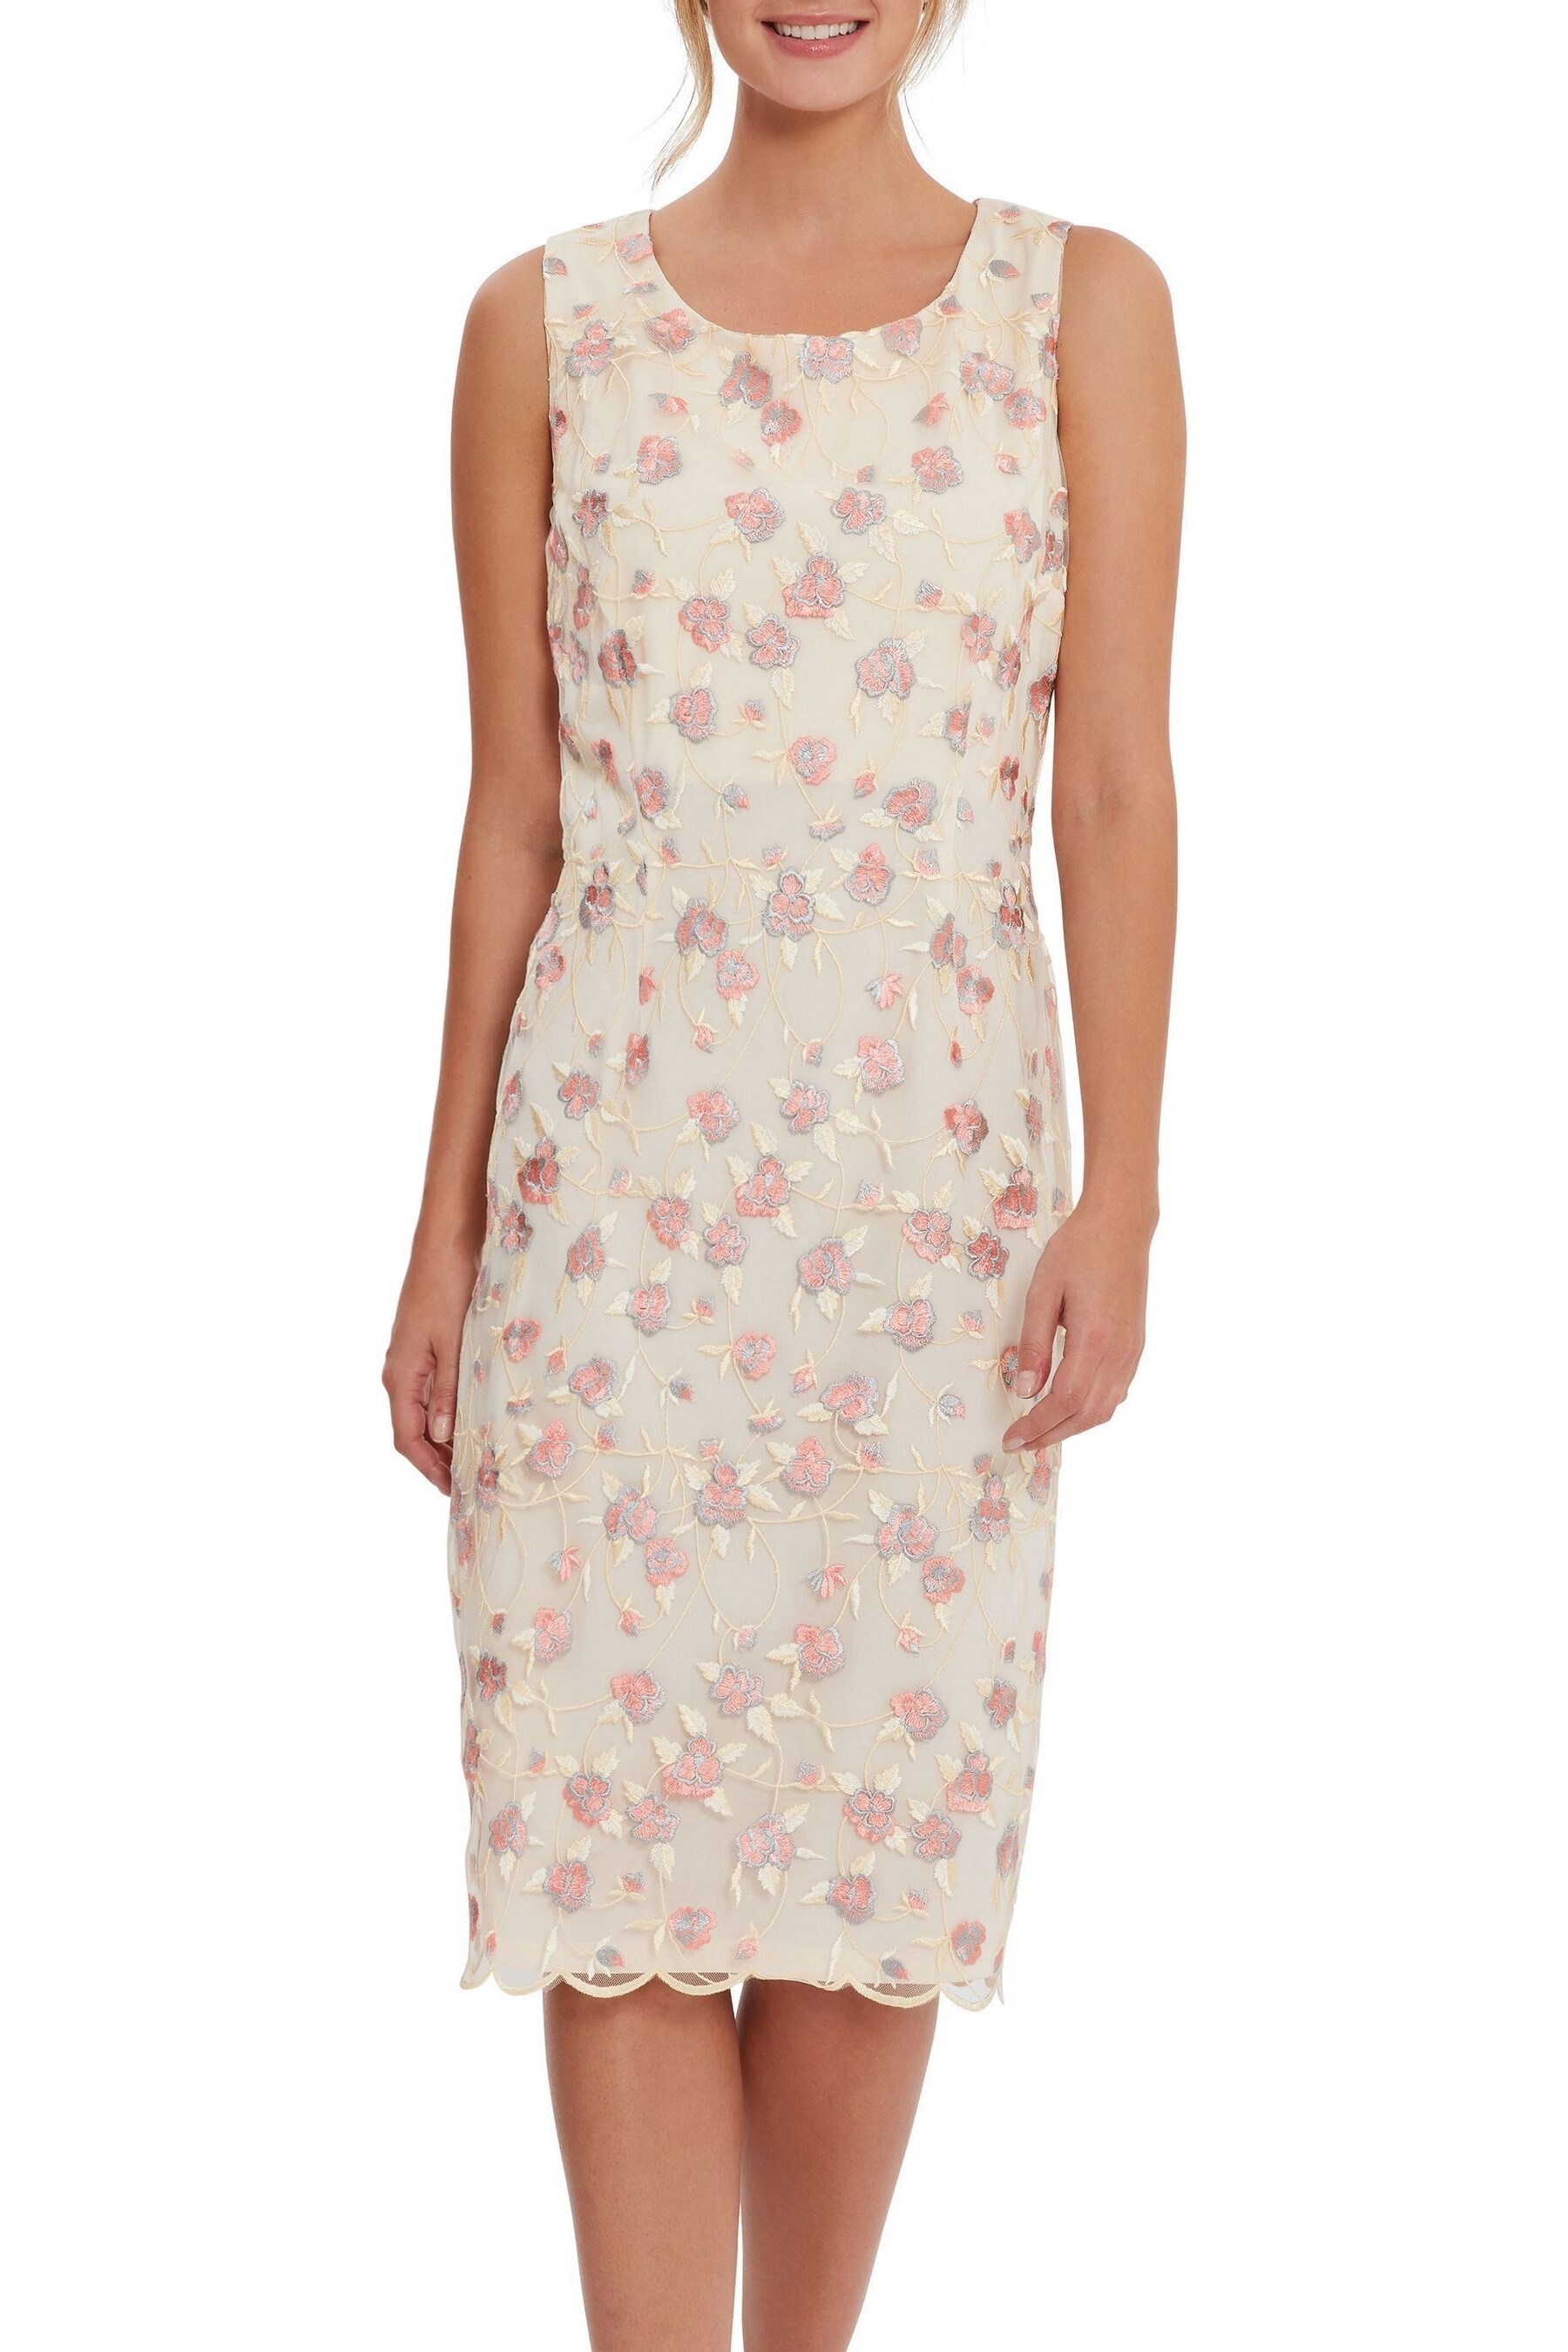 Buy Gina Bacconi Cream Hanneli Embroidered Shift Dress from Next Ireland